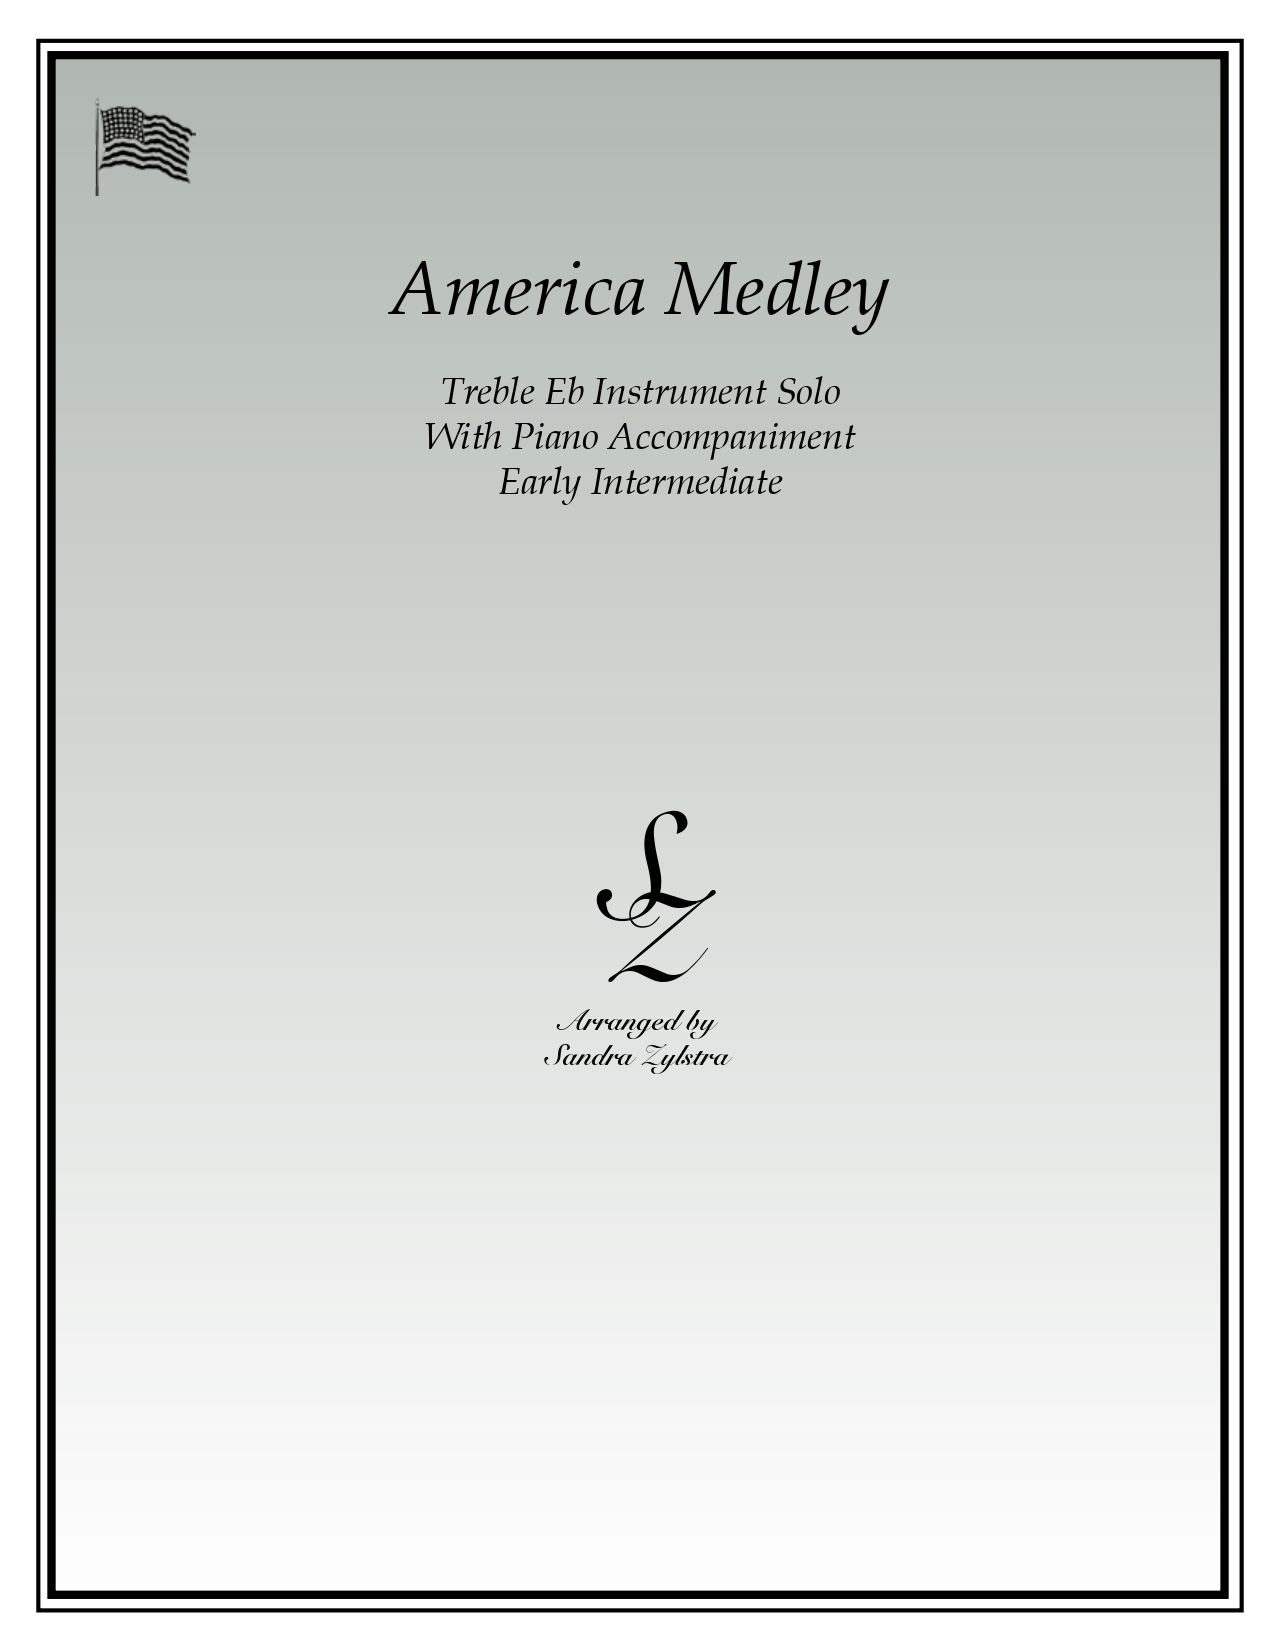 America Medley Eb instrument solo part cover page 00011